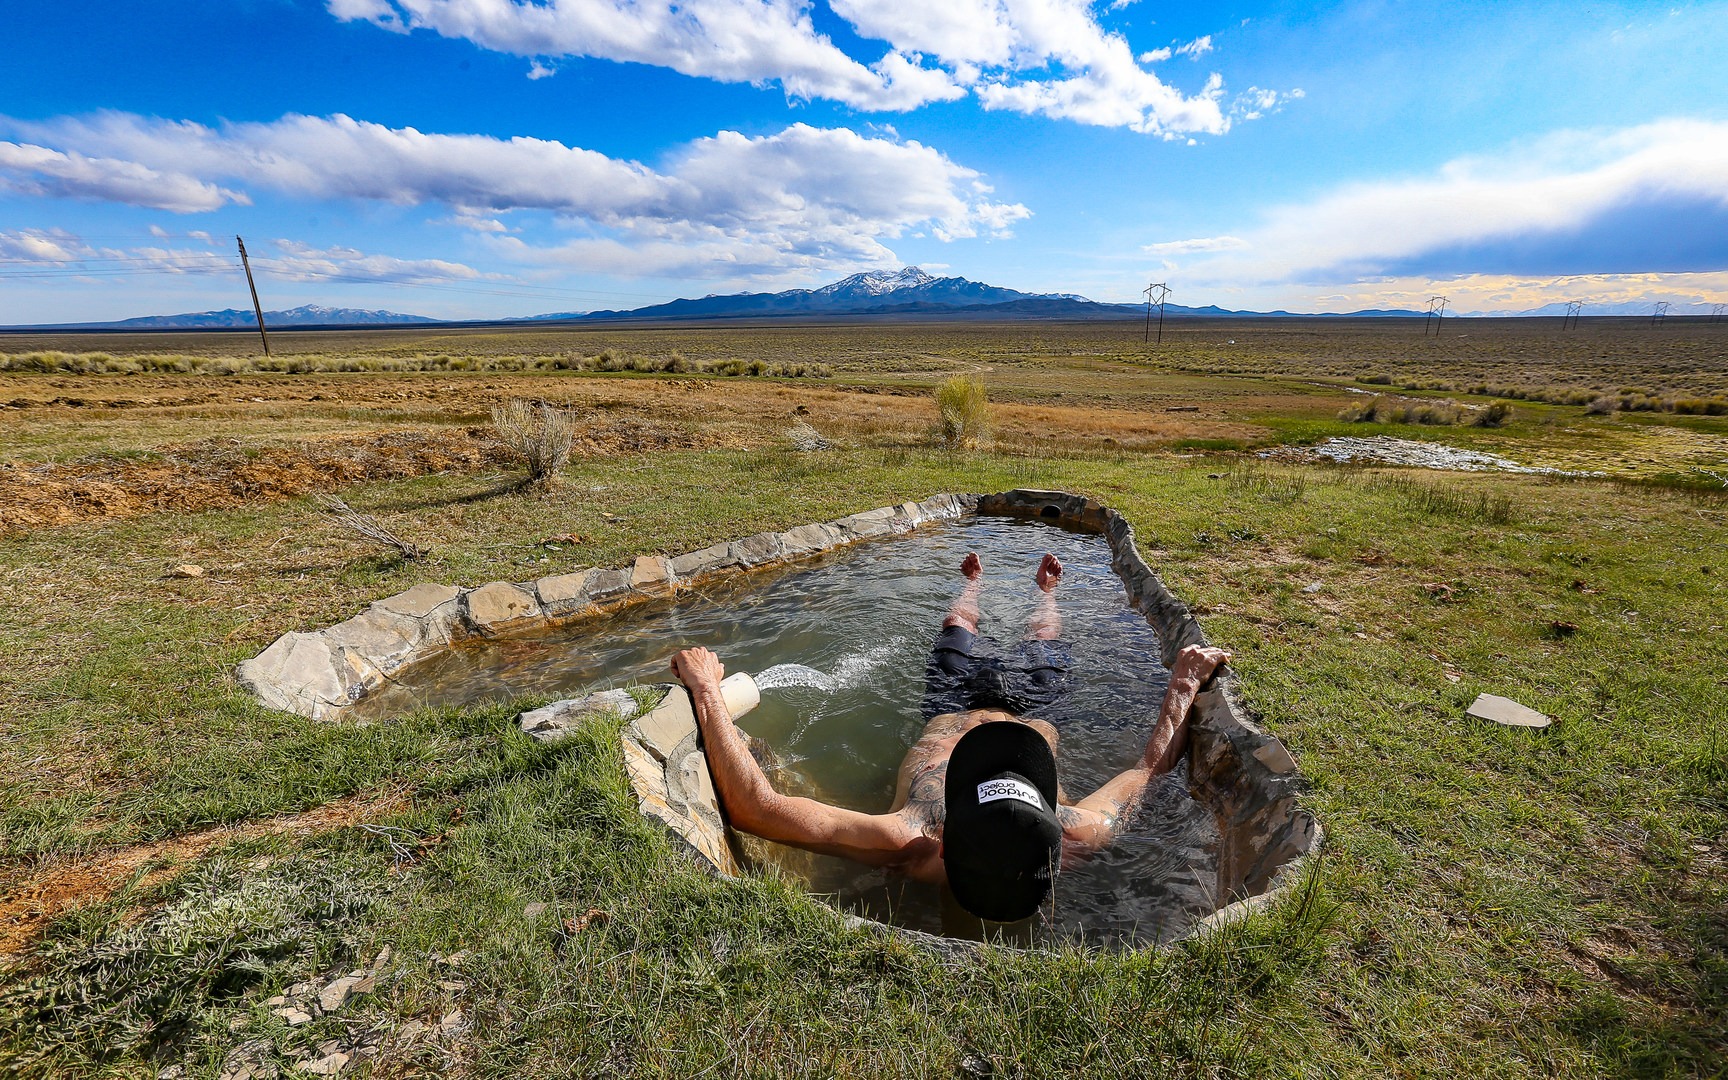 Nudist In The Desert - The Naked Truth About Hot Springs | Outdoor Project